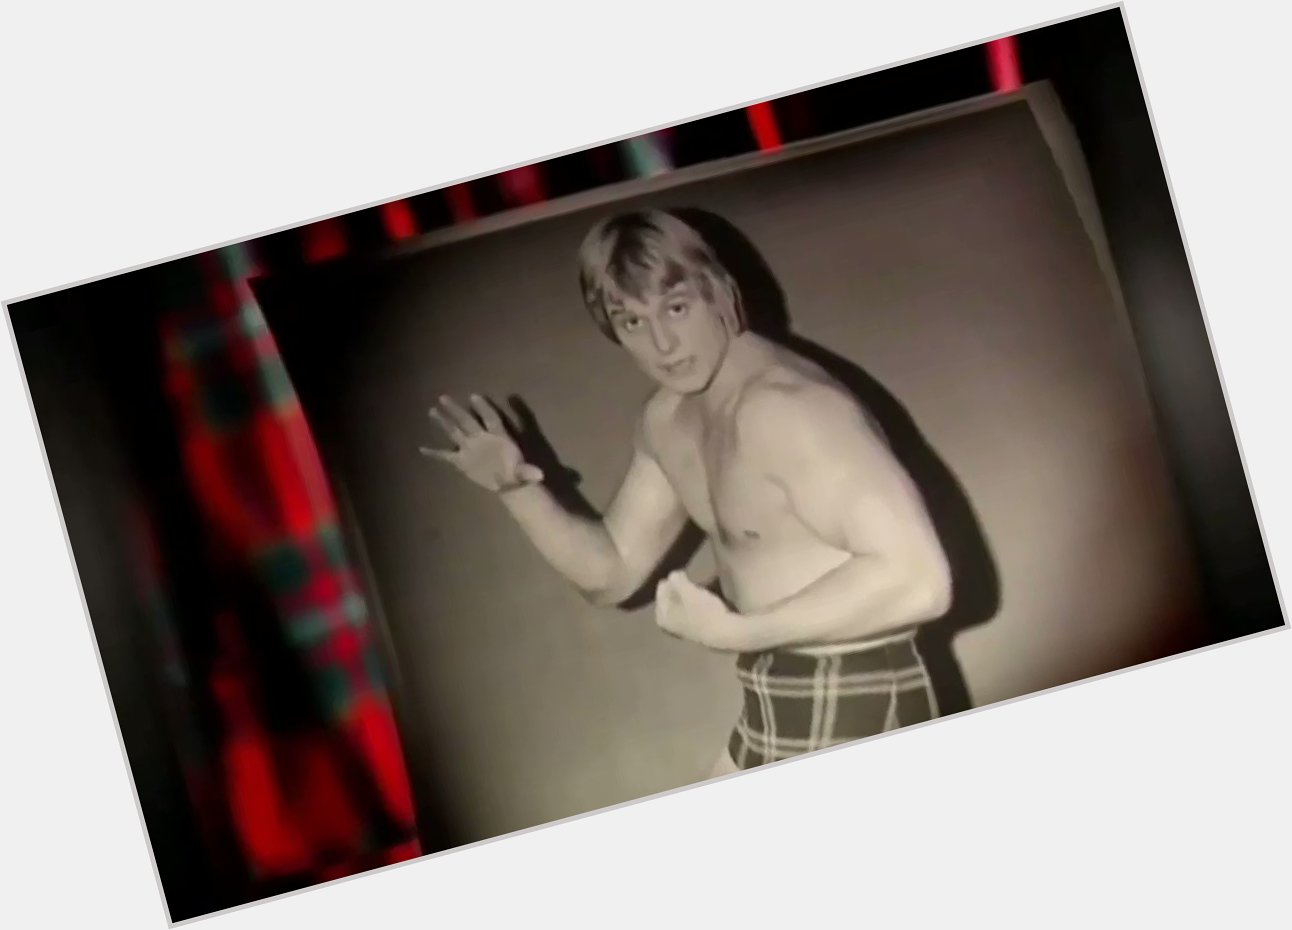 Today would have been Roddy Piper\s 64th birthday.

Happy birthday Hot Rod!

RIP. 